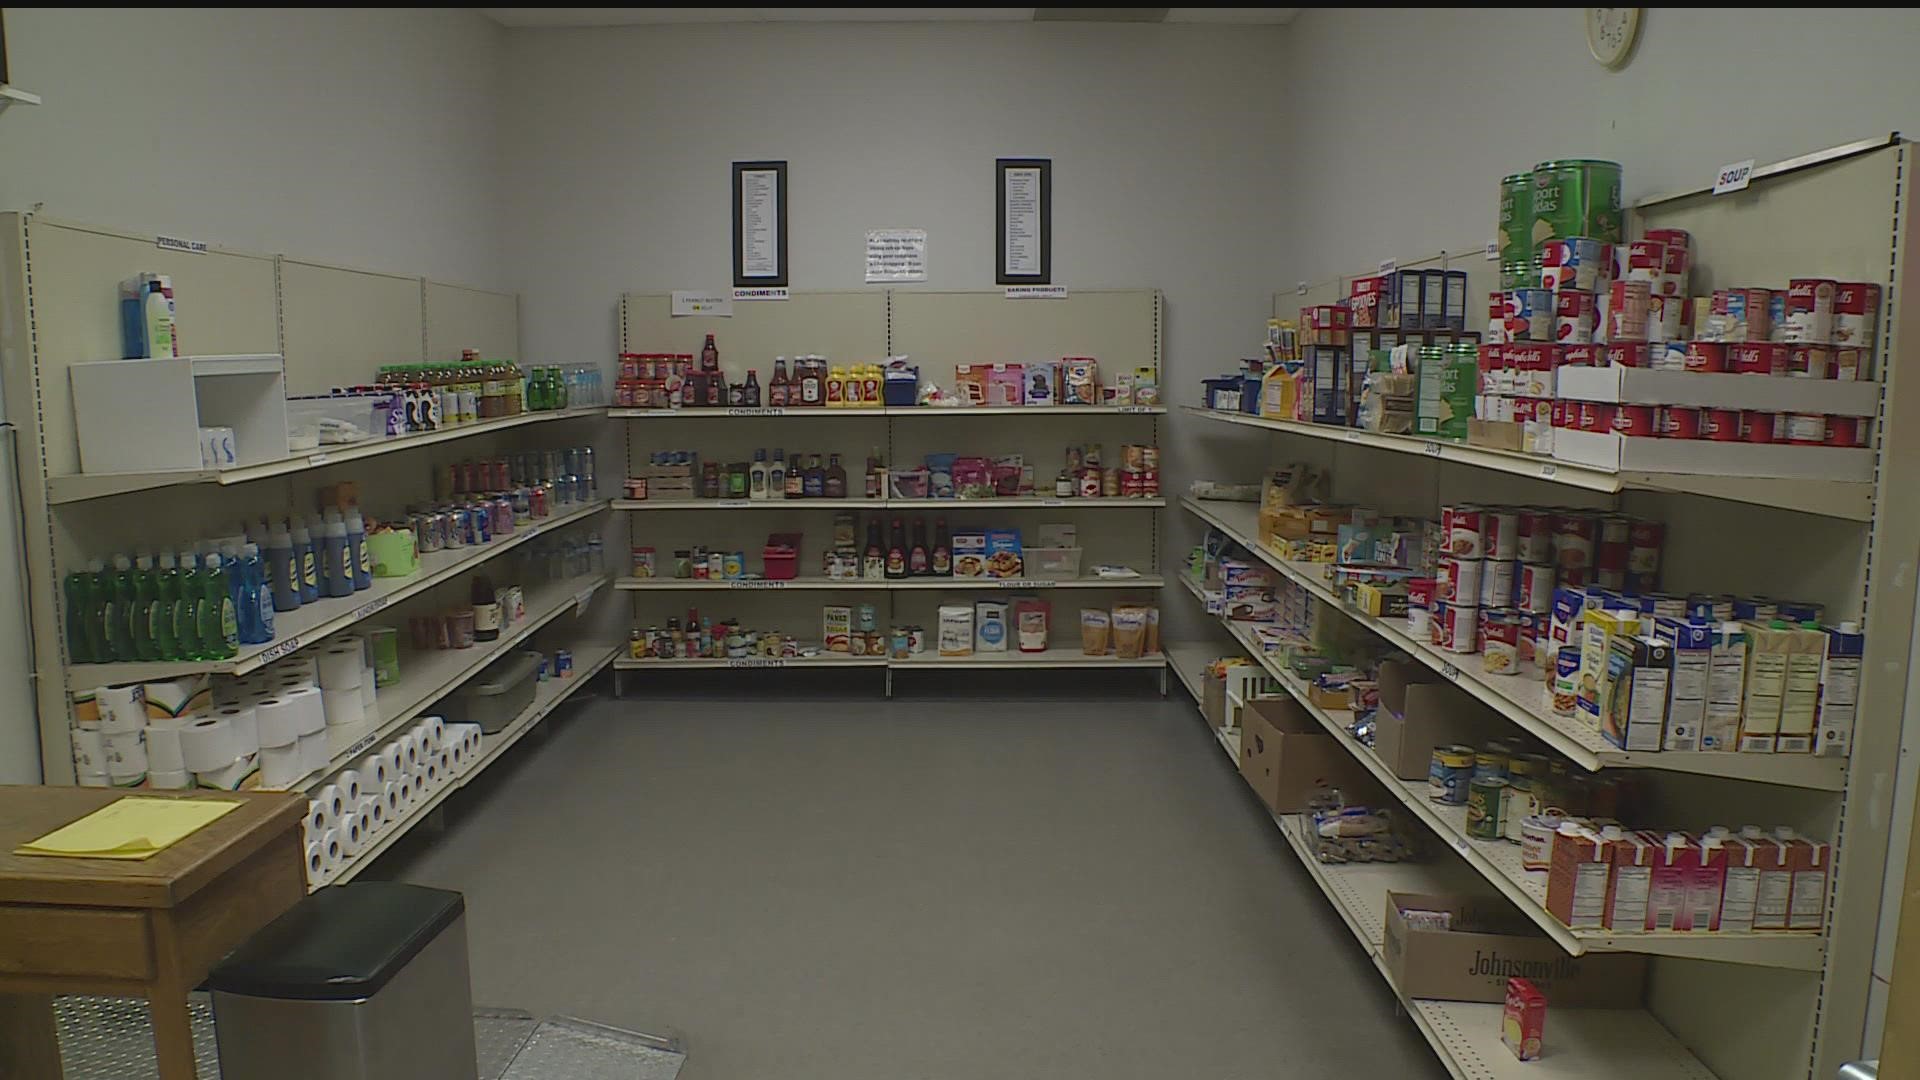 Organizations like Second Harvest Heartland say a bonding bill would help food shelters and banks meet rising demands.